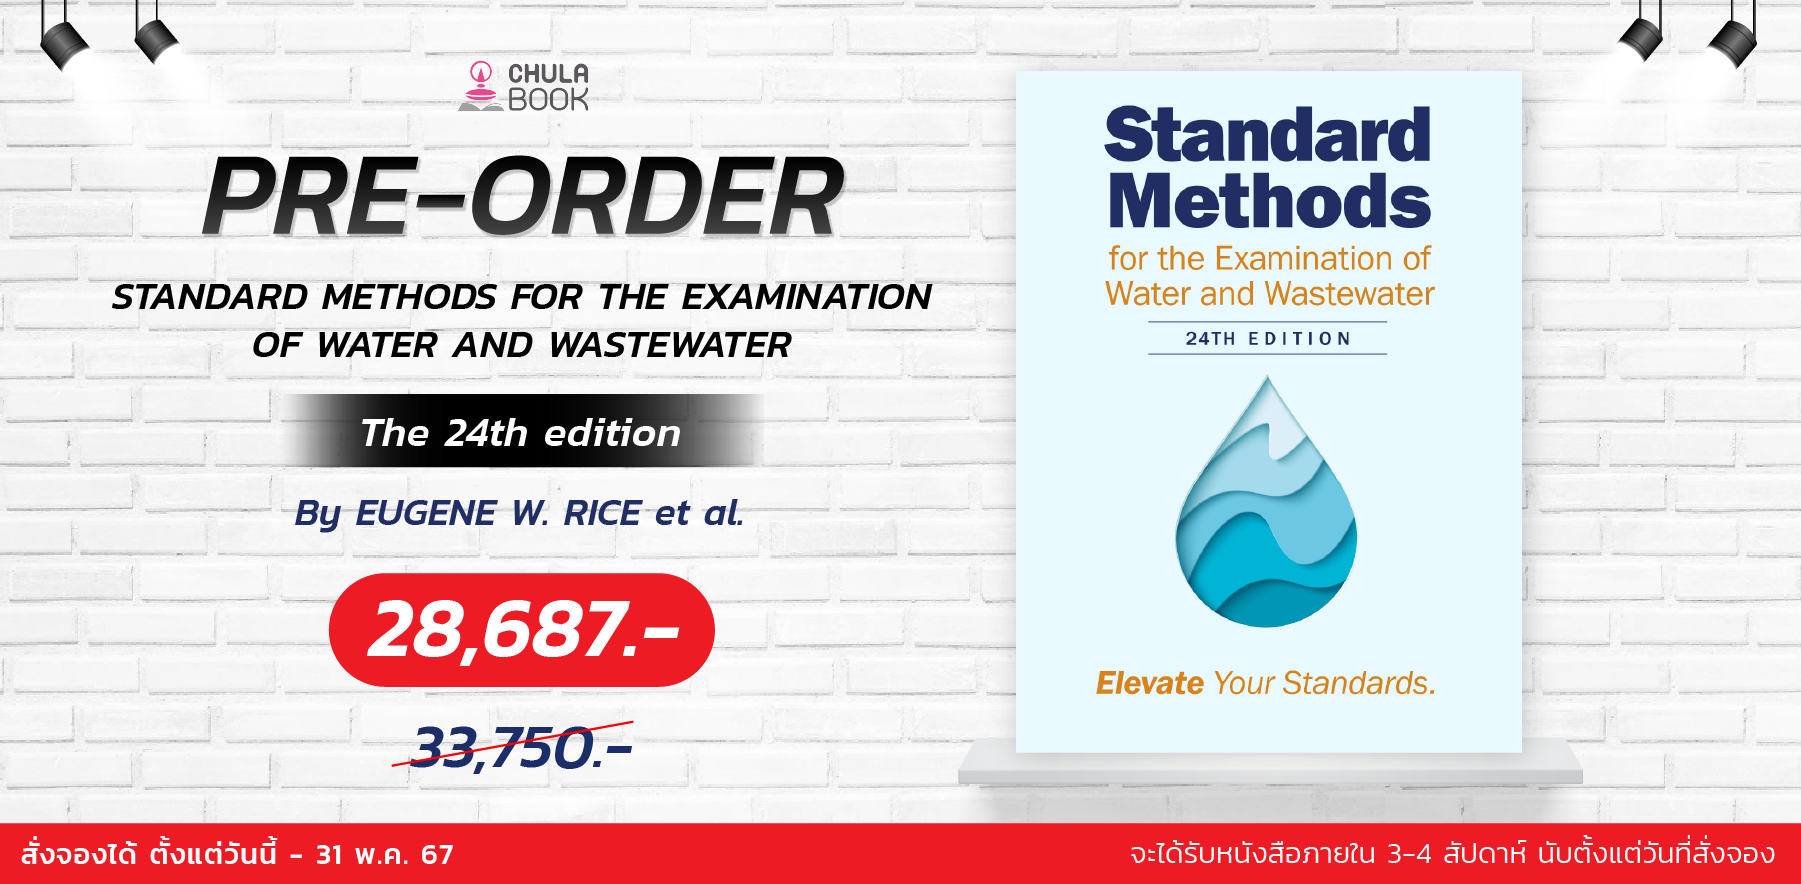 Pre-Order STANDARD METHODS FOR THE EXAMINATION OF WATER AND WASTEWATER